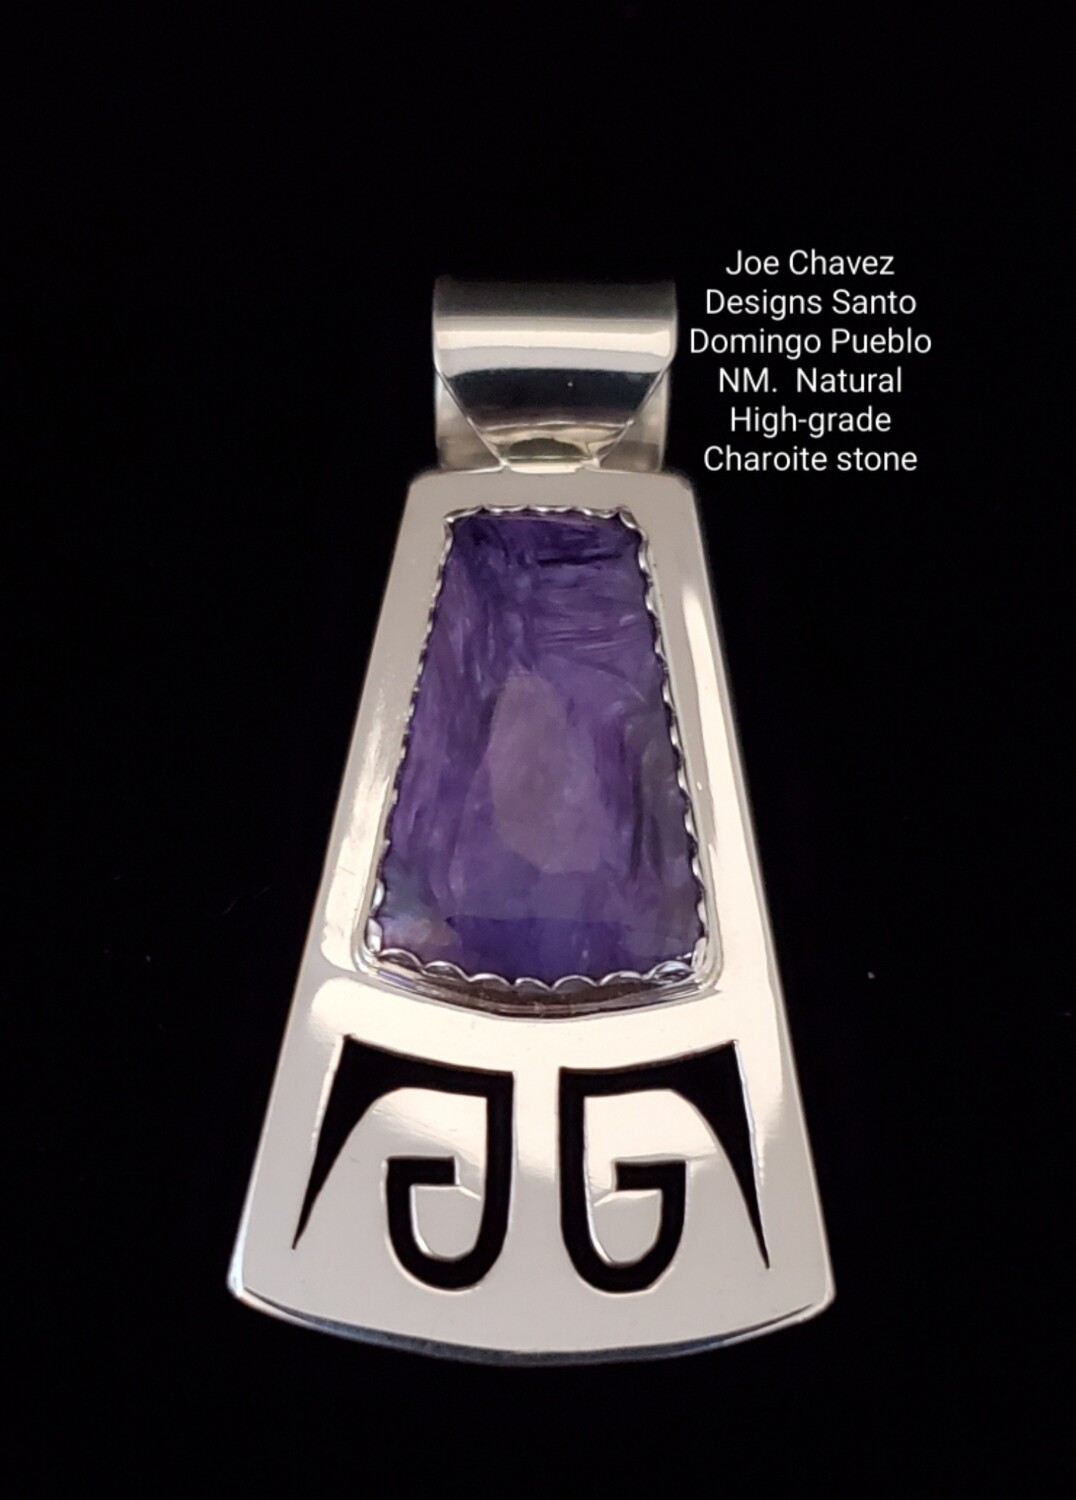 Sterling silver pendant with "cutout" designs and natural high-quality Charoite stone